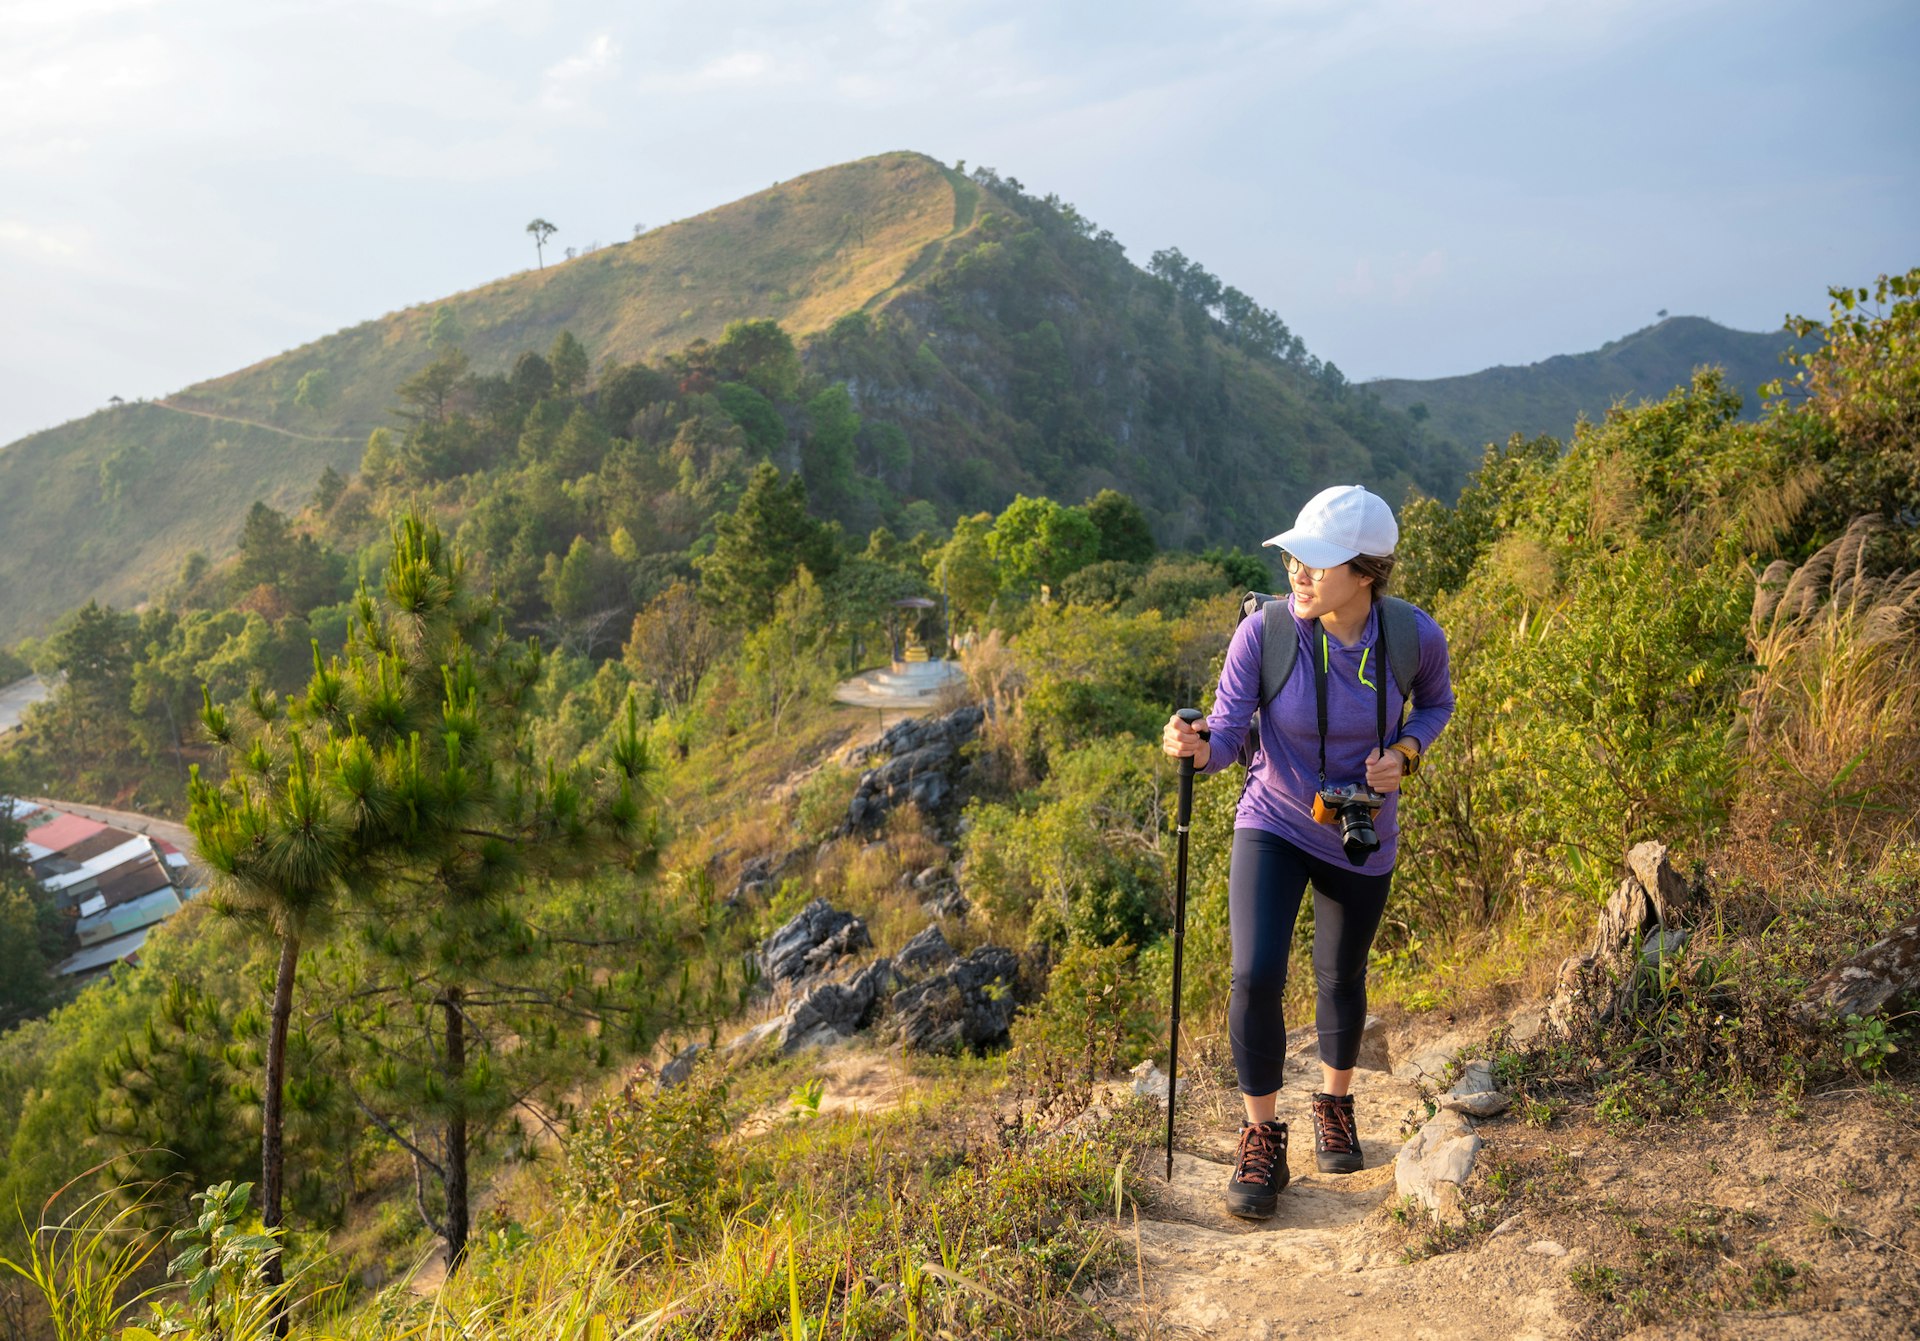 Young Asian woman hiking on a mountain with a high cliff in Thailand